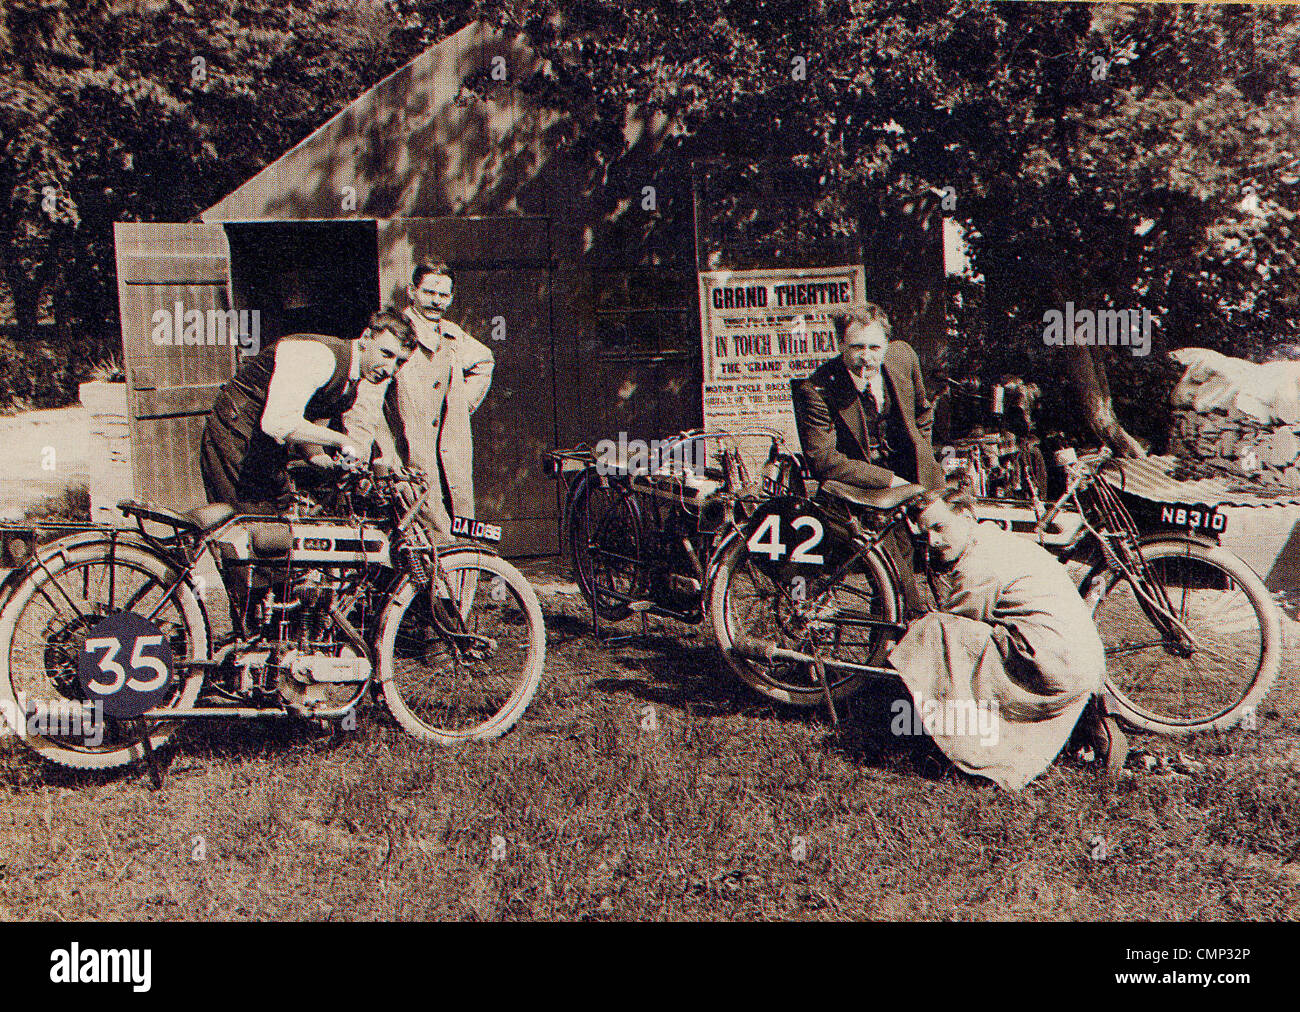 Motorcycle Race Team (1914), A. J. Stevens & Company Ltd., Wolverhampton, late 20th cent. A photograph from 'Motorcycle News' Stock Photo